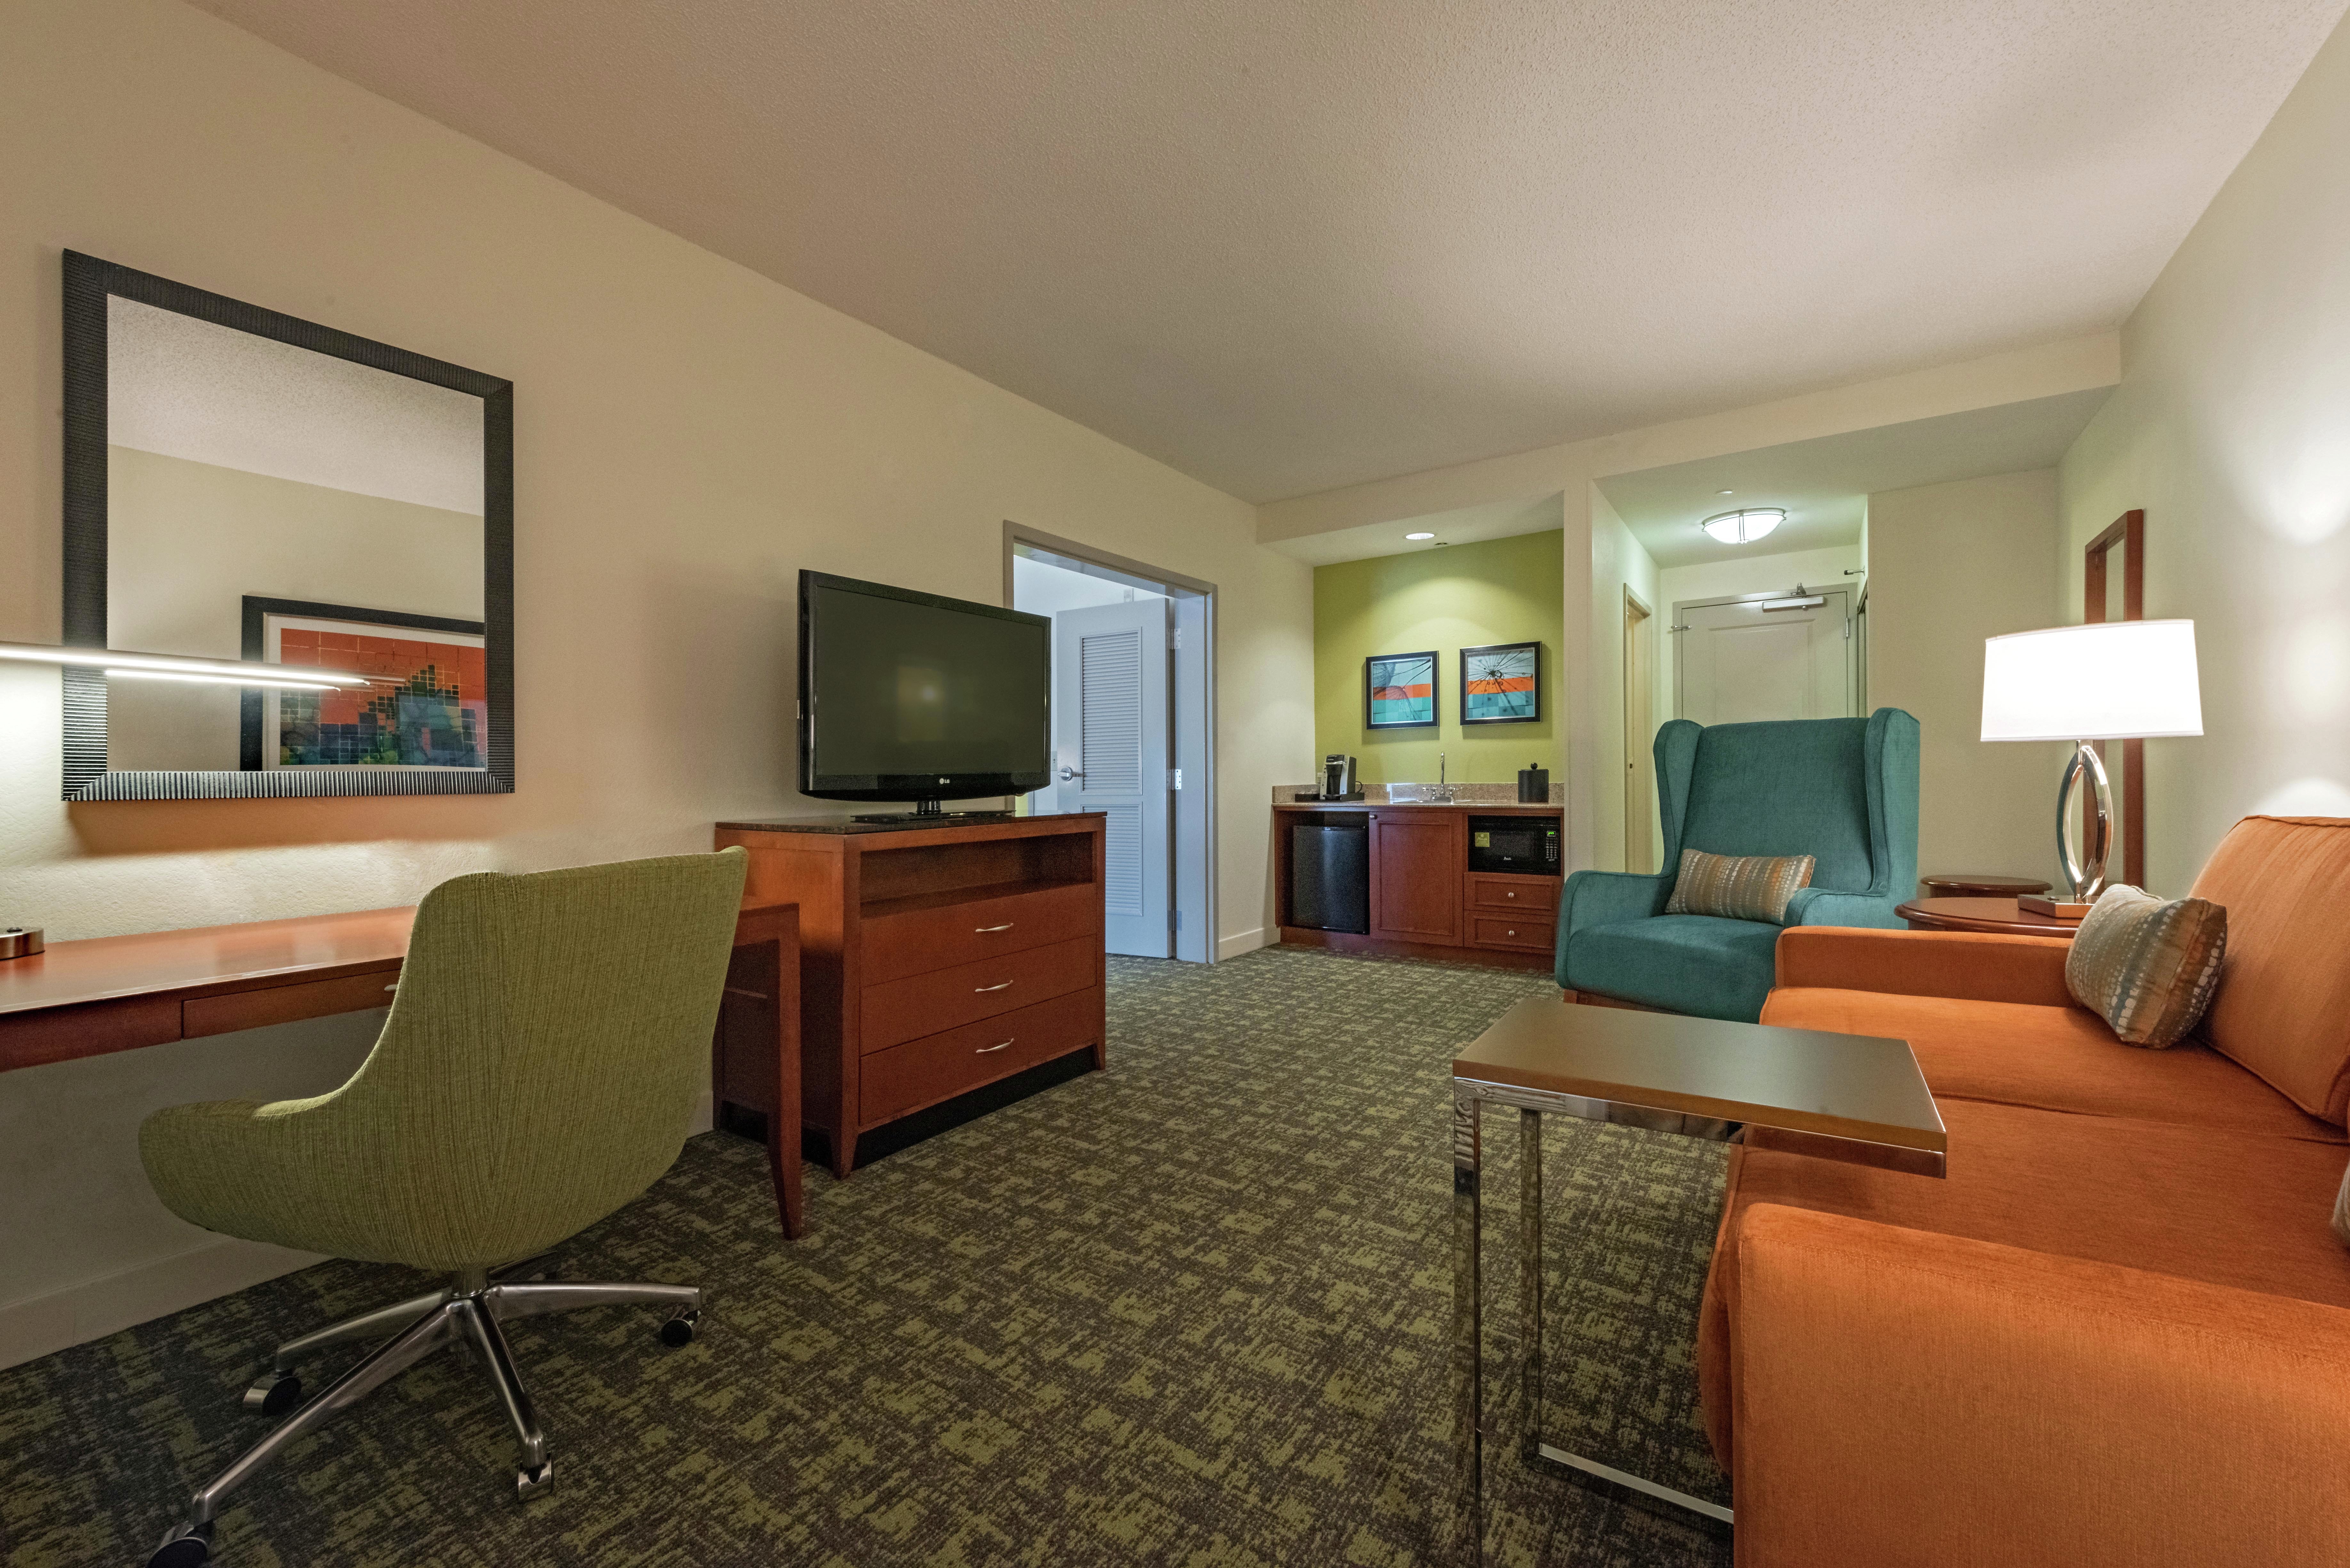 Guestroom Suite with Lounge Area, Work Desk, and Room Technology